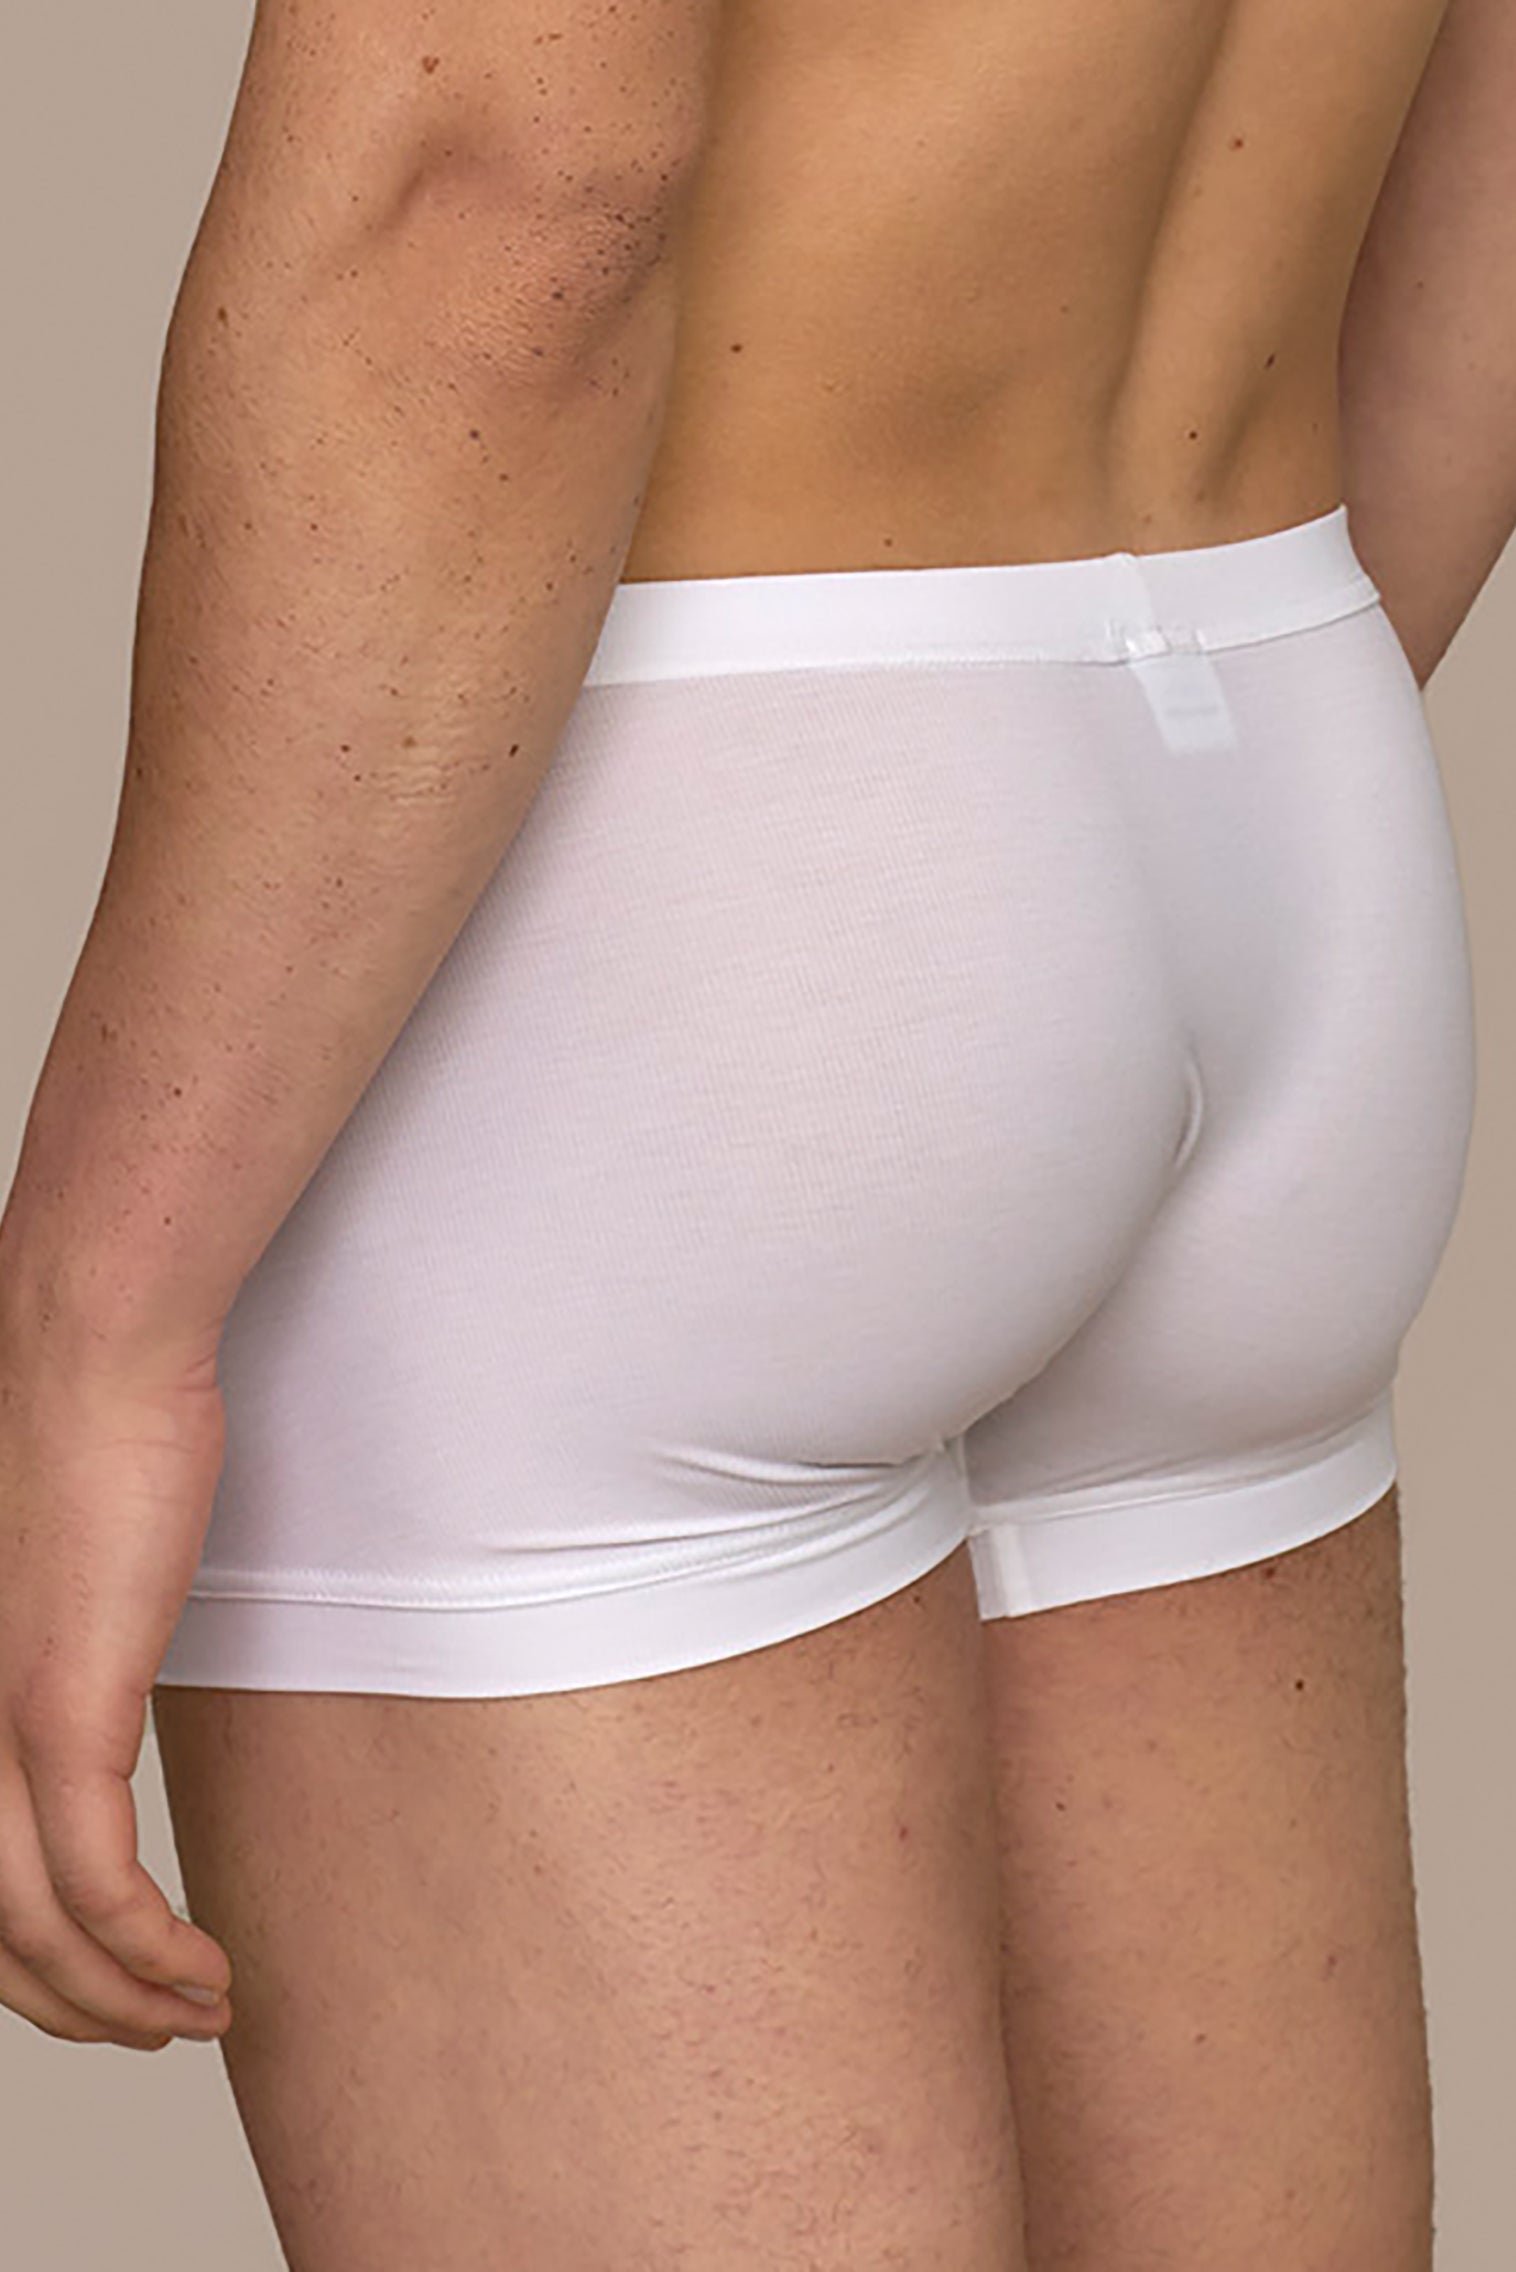 Boxer briefs / underpants in white made of natural MicroModal